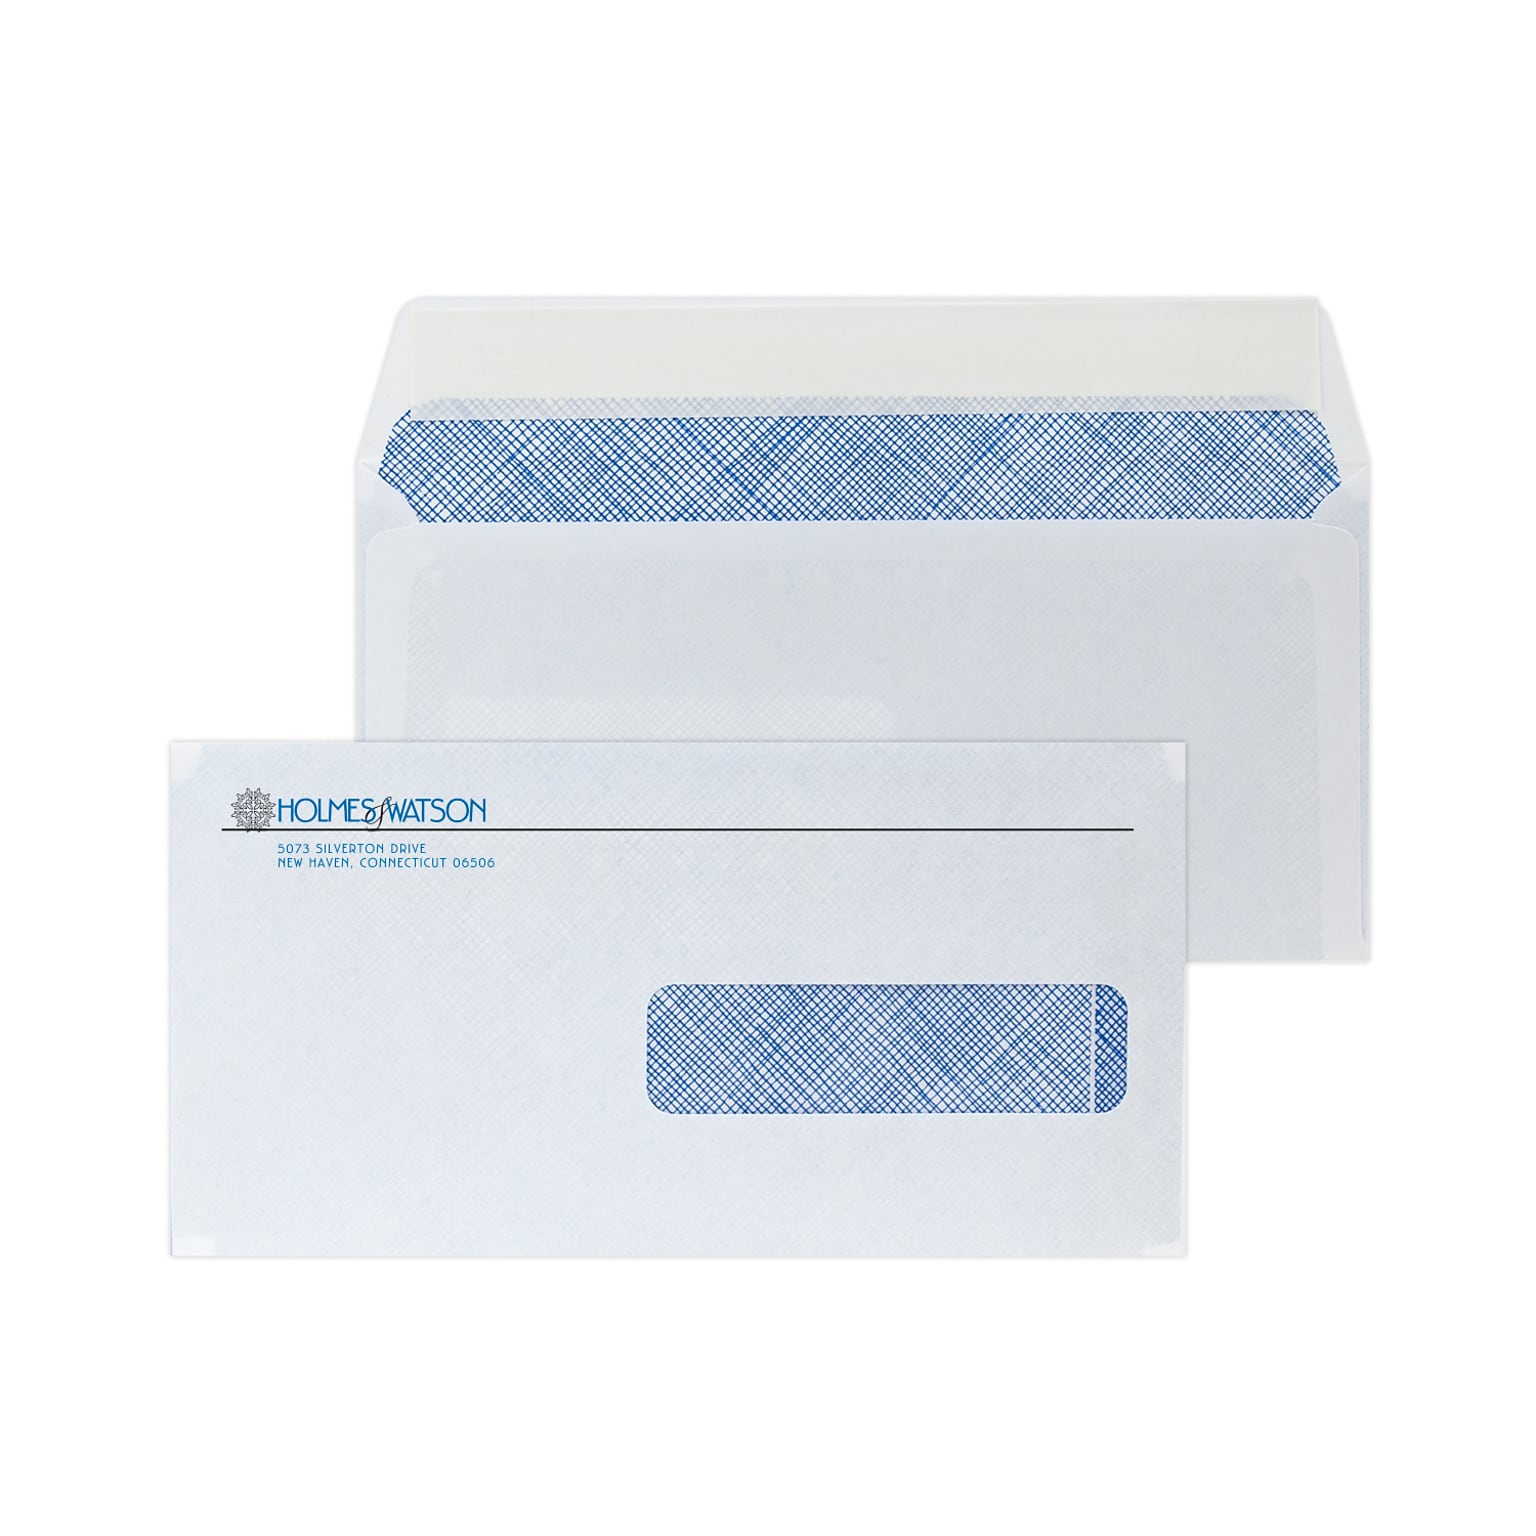 Custom 4-1/2x9 Insurance Claim Peel and Seal Right Window Envelopes with Security Tint, 24# White Wove, 2 Std Inks, 250/Pack